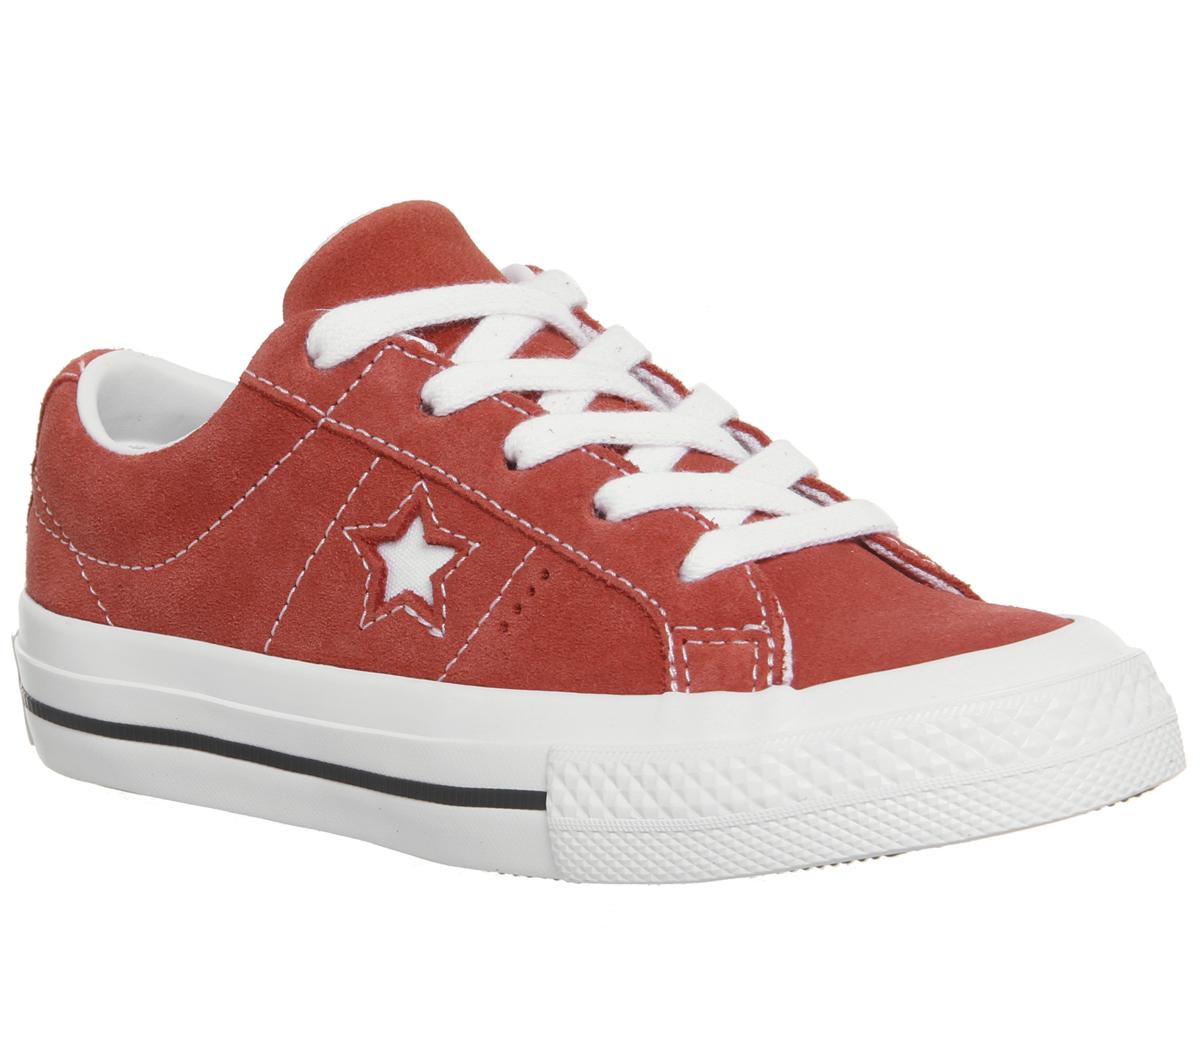 red one star converse